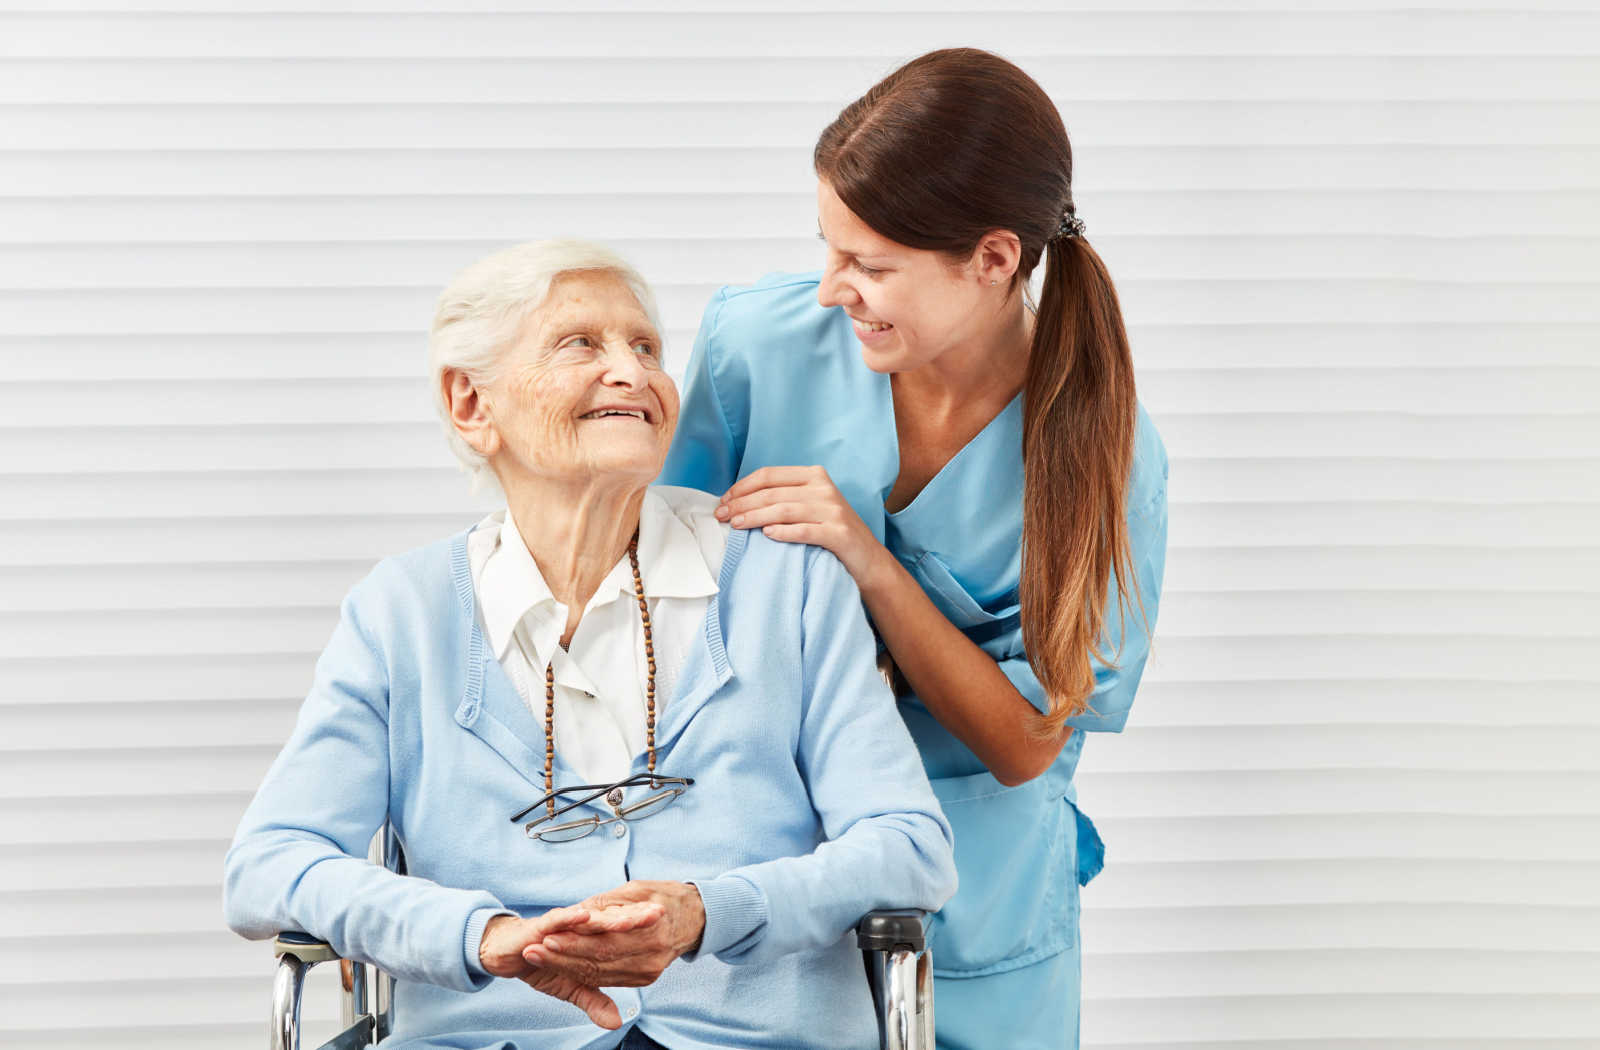 A senior woman sitting on a chair and having a conversation with a nurse.